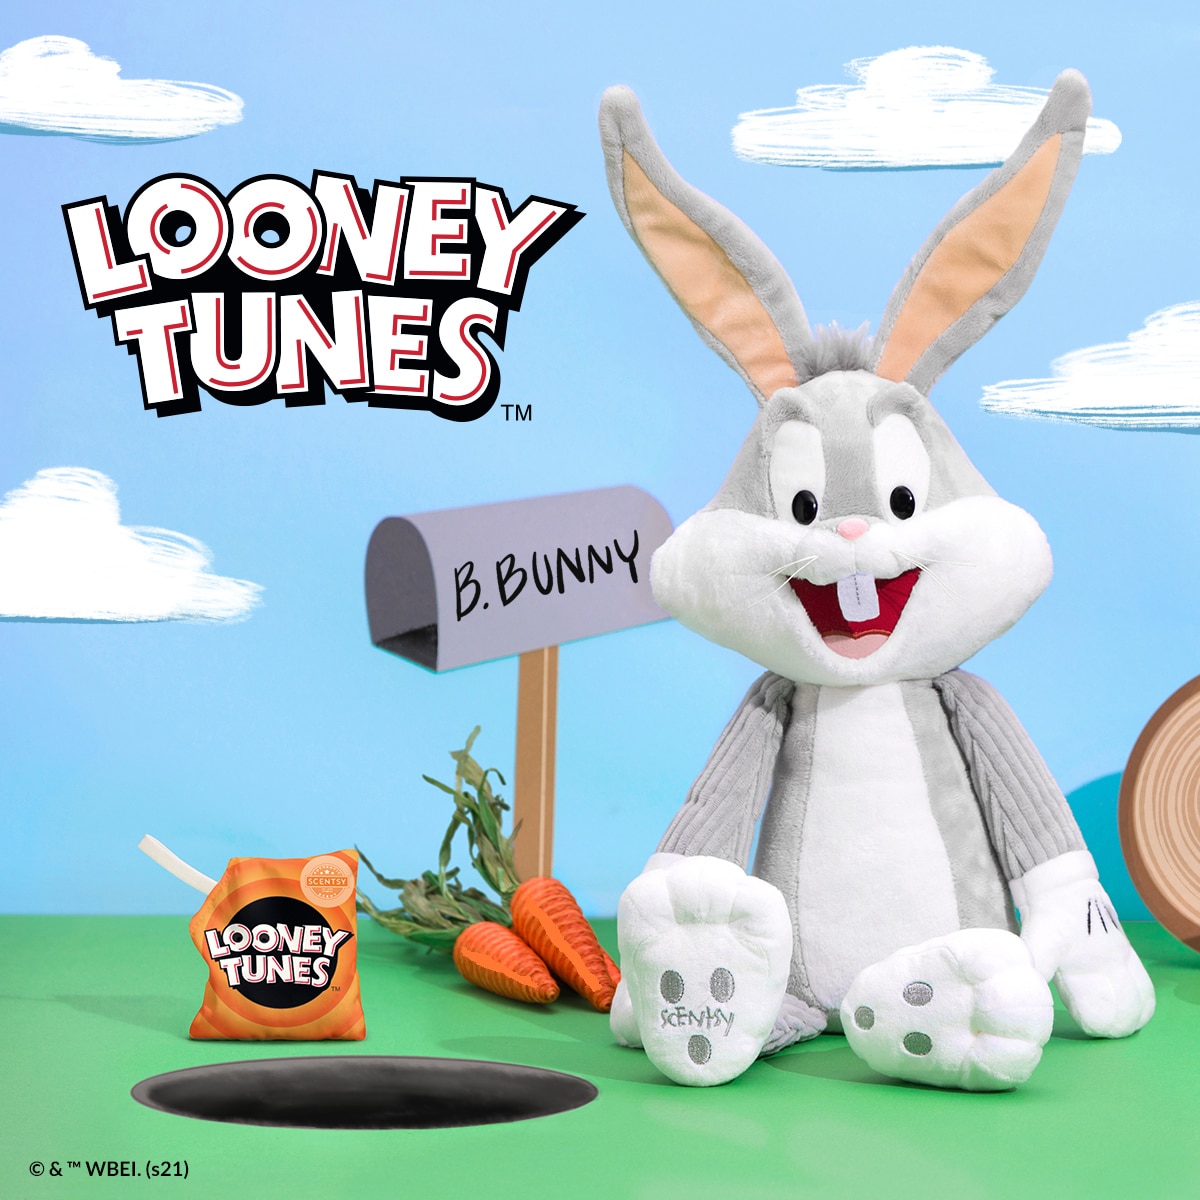 Scentsy Buddy LOONEY TUNES Bugs Bunny & Daffy Duck Scent Paks